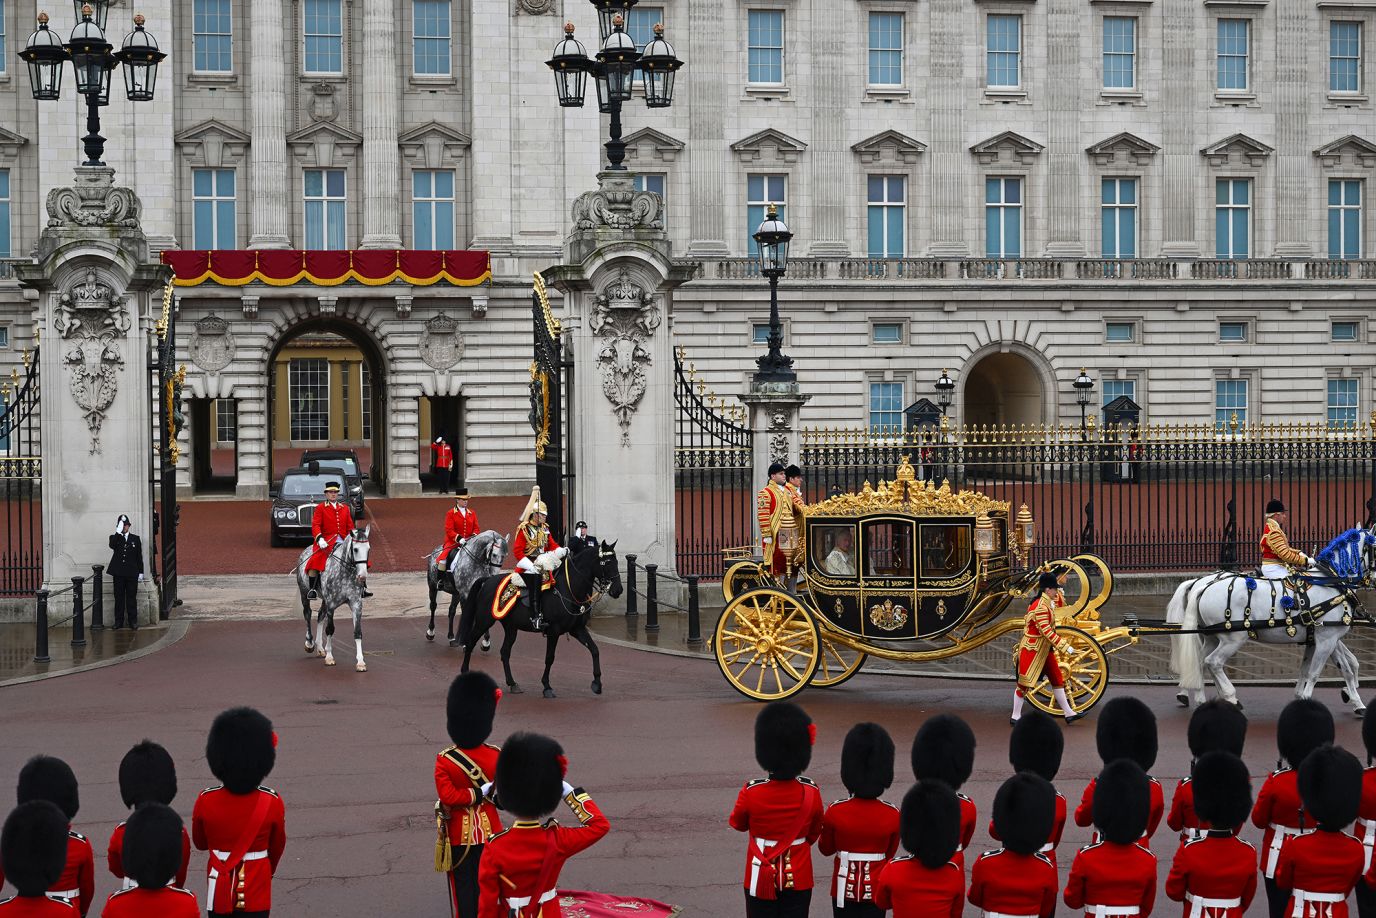 The King's carriage leaves Buckingham Palace before the coronation.